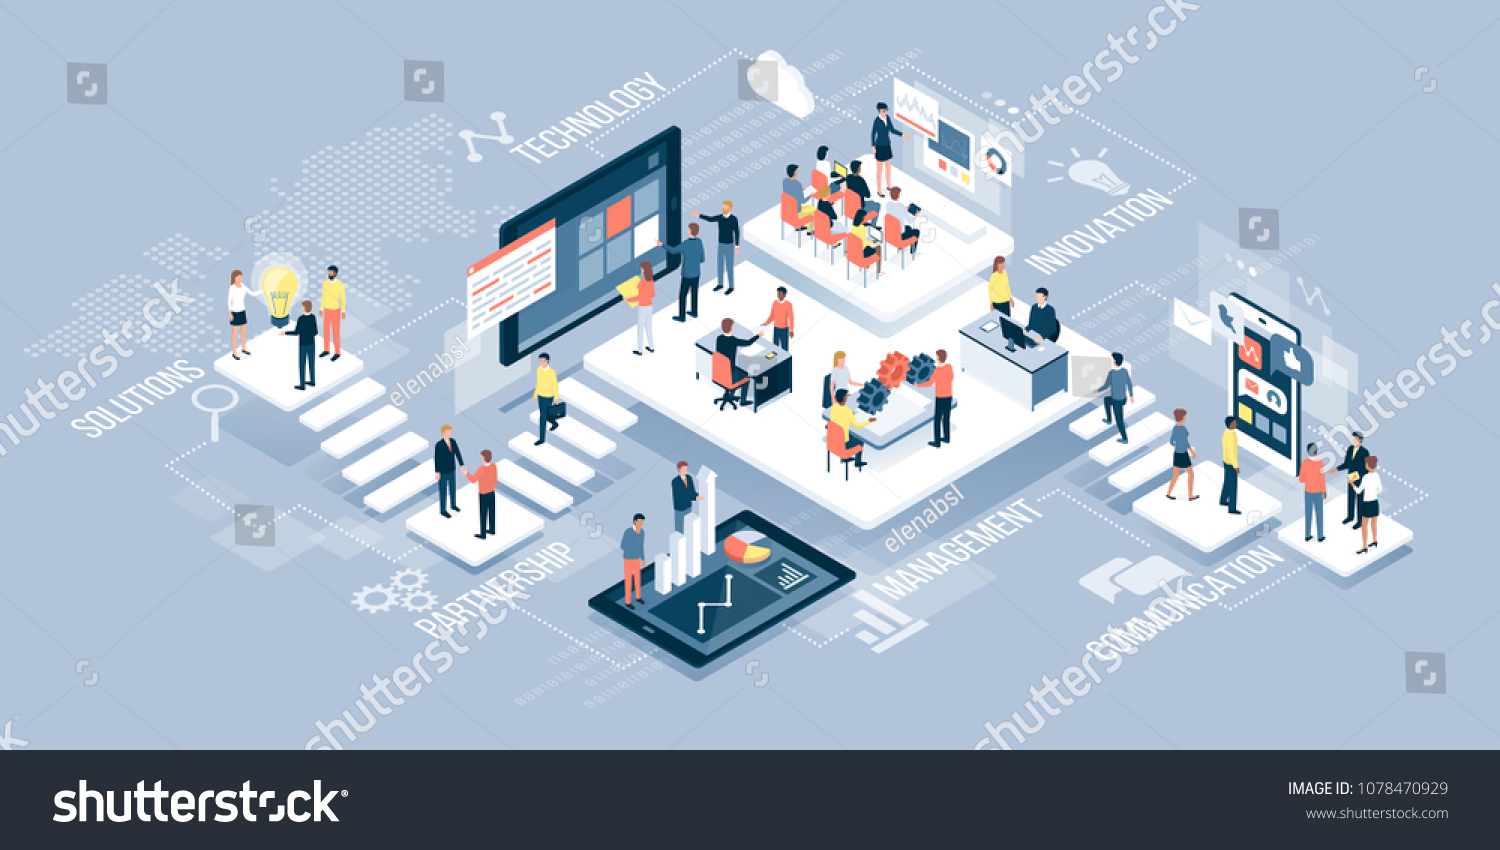 Isometric virtual office with business people working together and mobile devices: business management, online communication and finance concept #1078470929